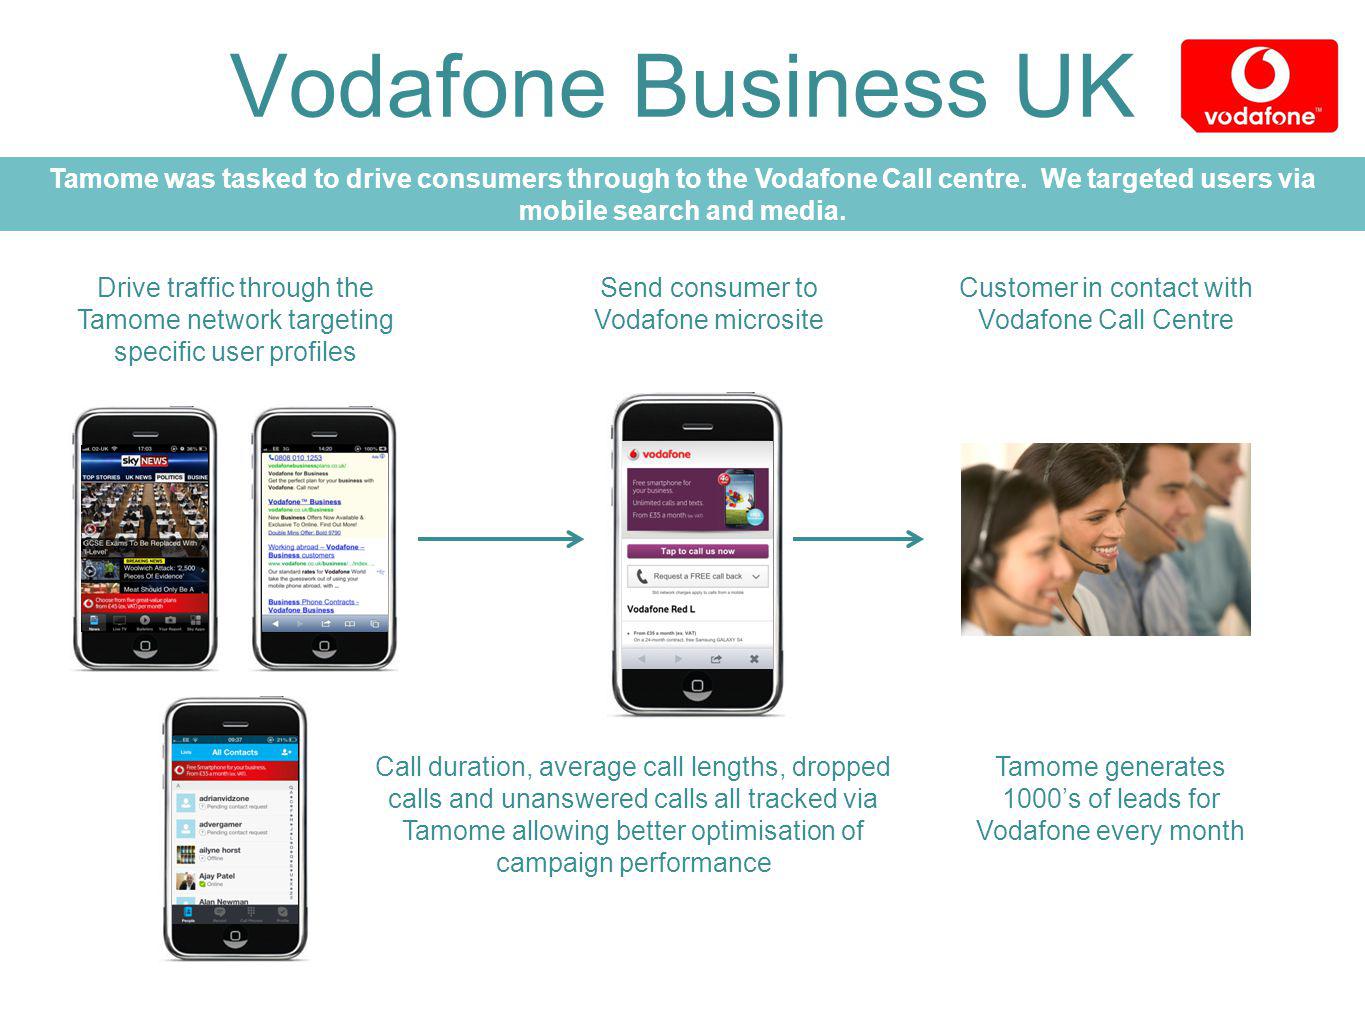 CONFIDENTIAL Vodafone Business UK Drive traffic through the Tamome network targeting specific user profiles Send consumer to Vodafone microsite Customer in contact with Vodafone Call Centre Call duration, average call lengths, dropped calls and unanswered calls all tracked via Tamome allowing better optimisation of campaign performance Tamome generates 1000s of leads for Vodafone every month Tamome was tasked to drive consumers through to the Vodafone Call centre.